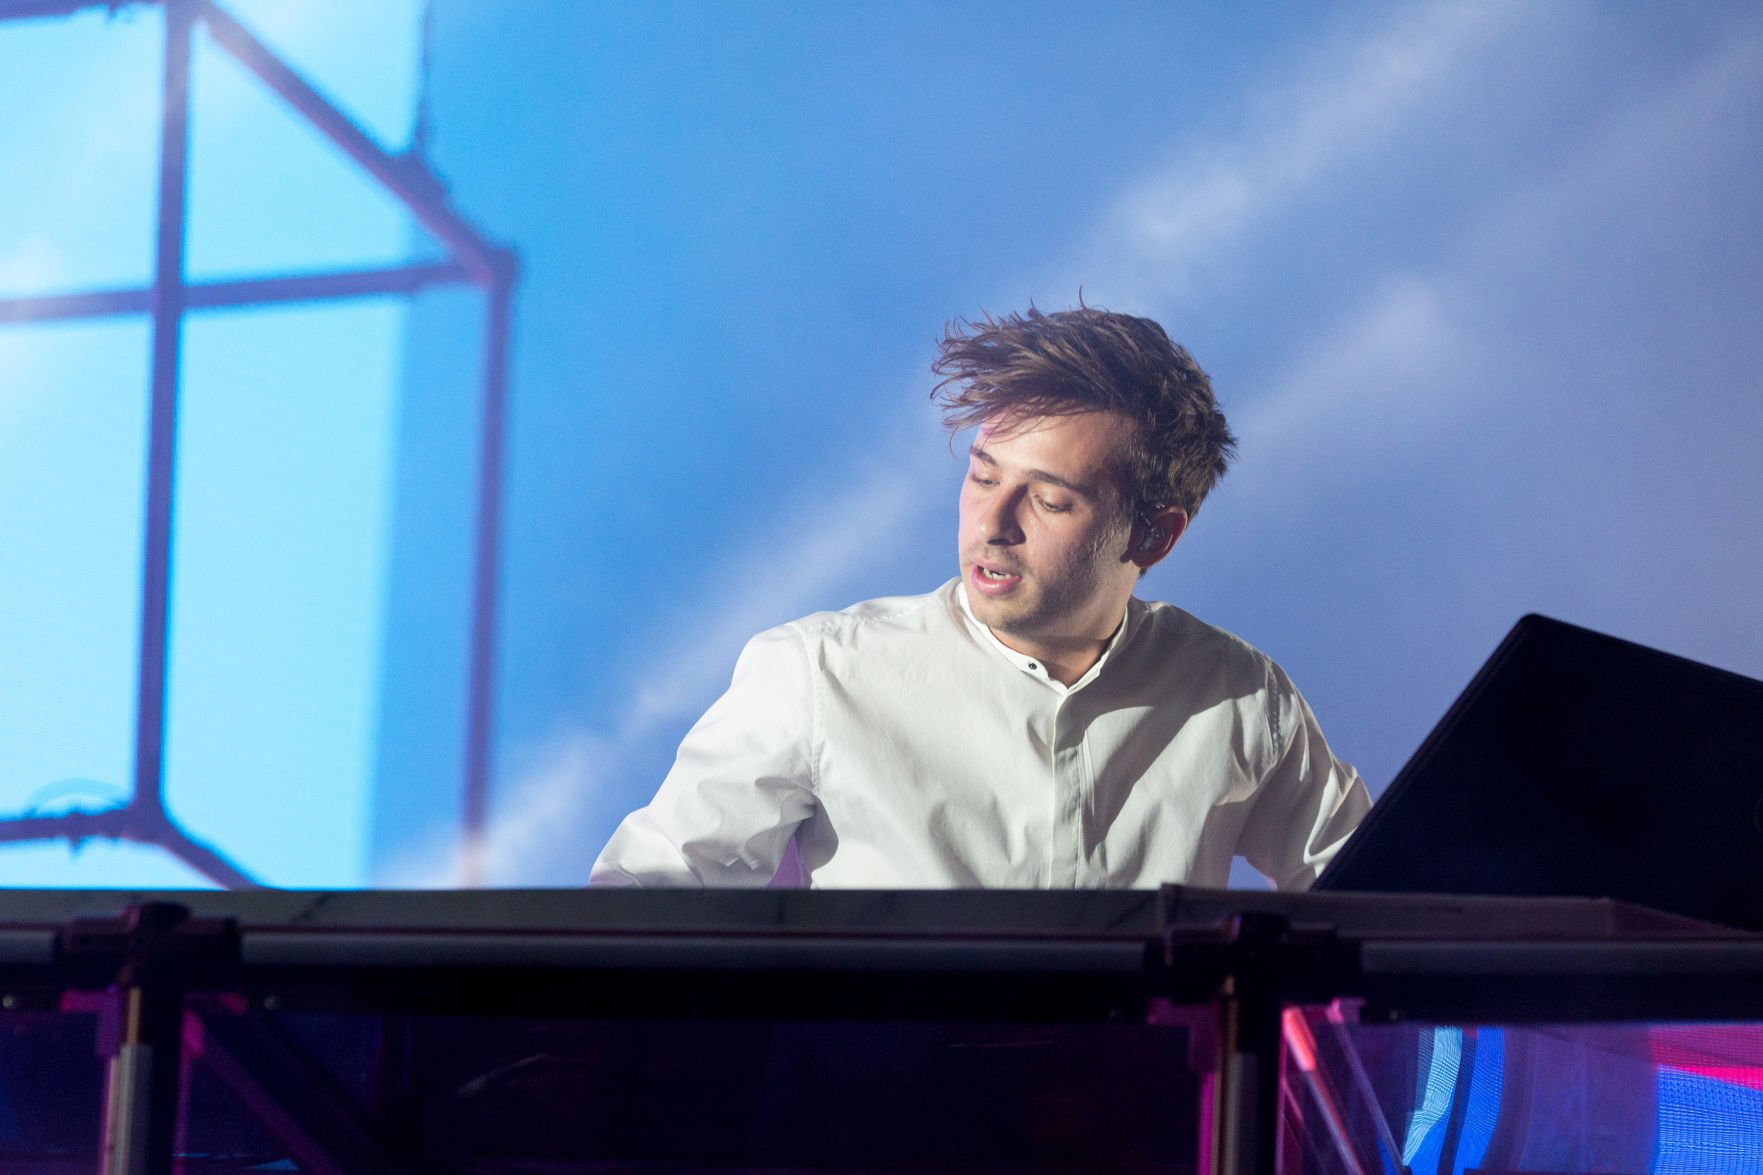 this is flume